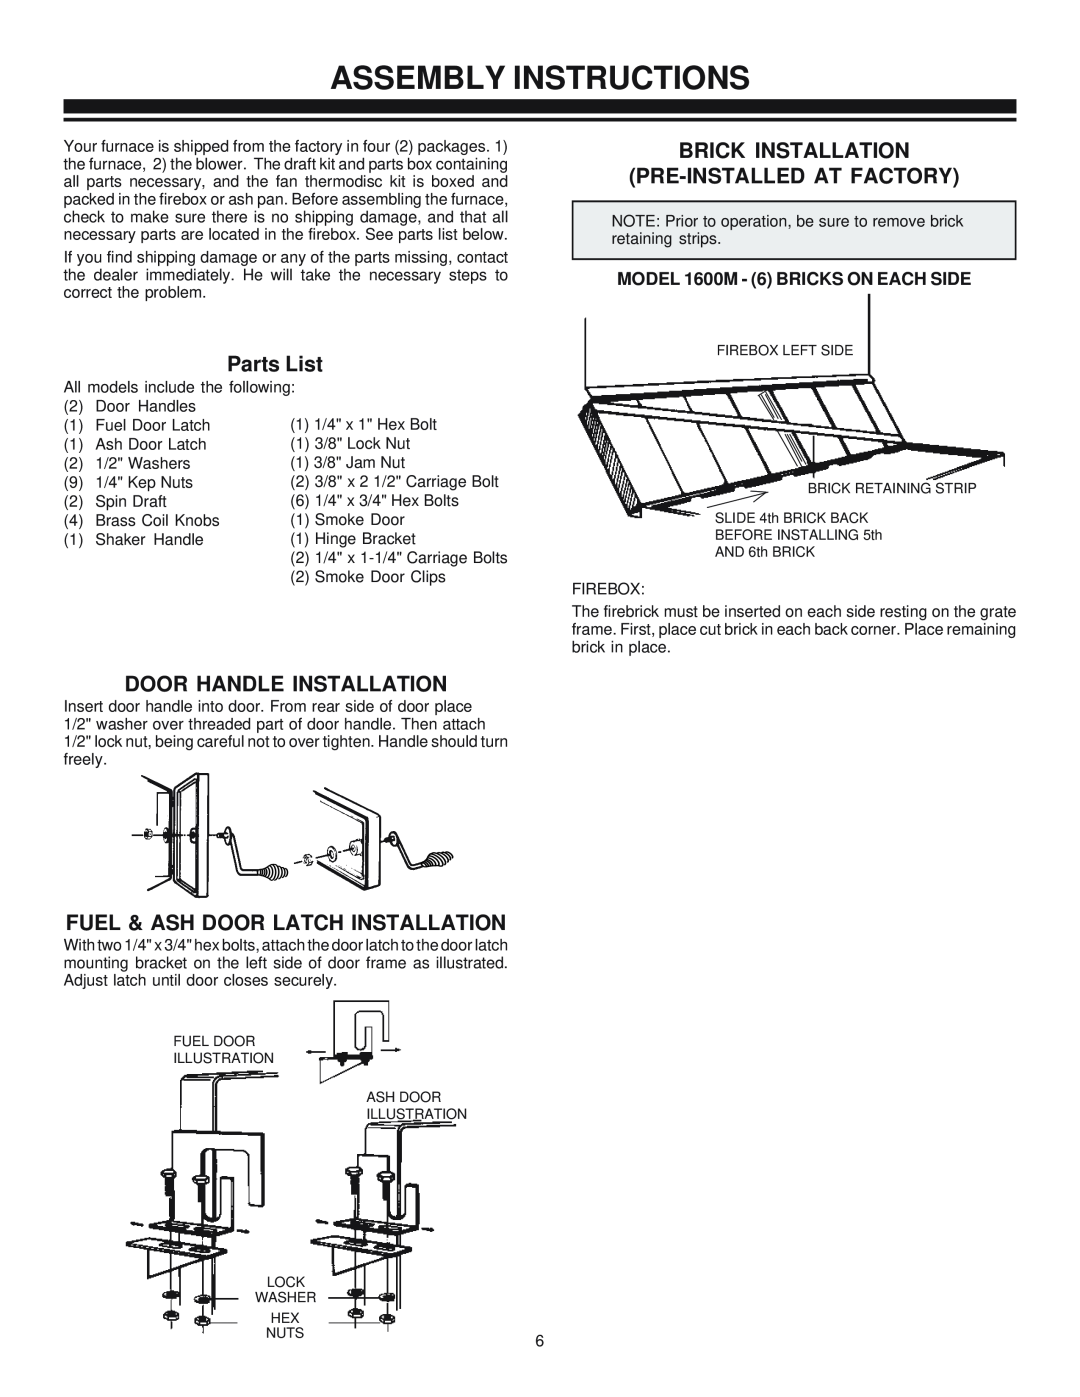 United States Stove 1600M Assembly Instructions, Parts List, Door Handle Installation, Fuel & Ash Door Latch Installation 